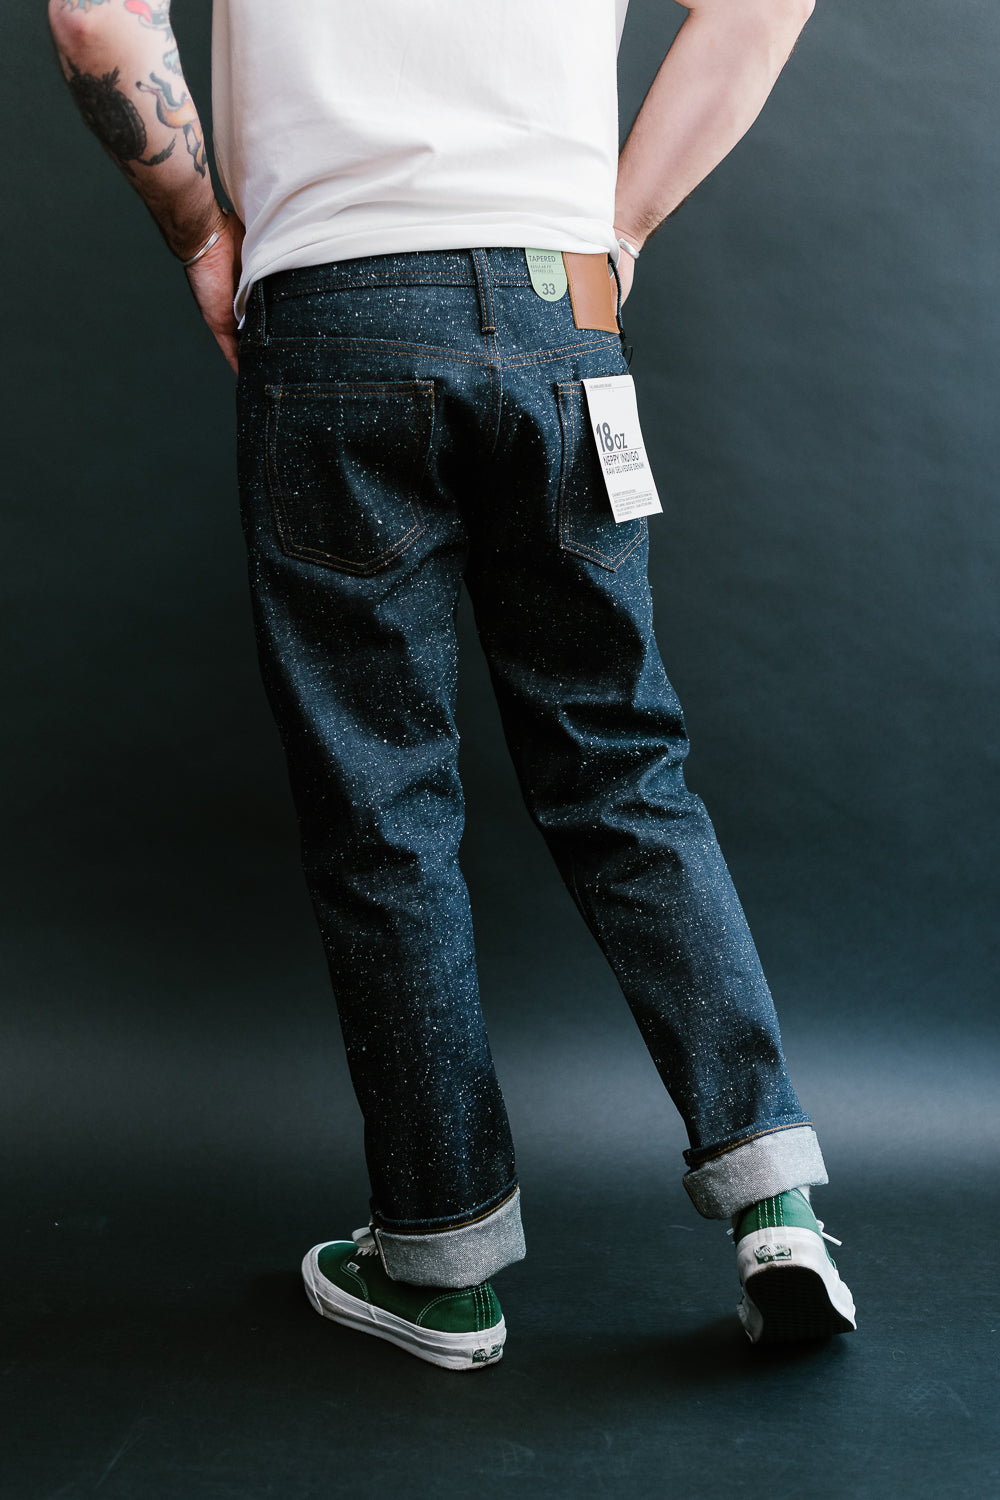 UB243 - 18oz Neppy Selvedge - Tapered Fit